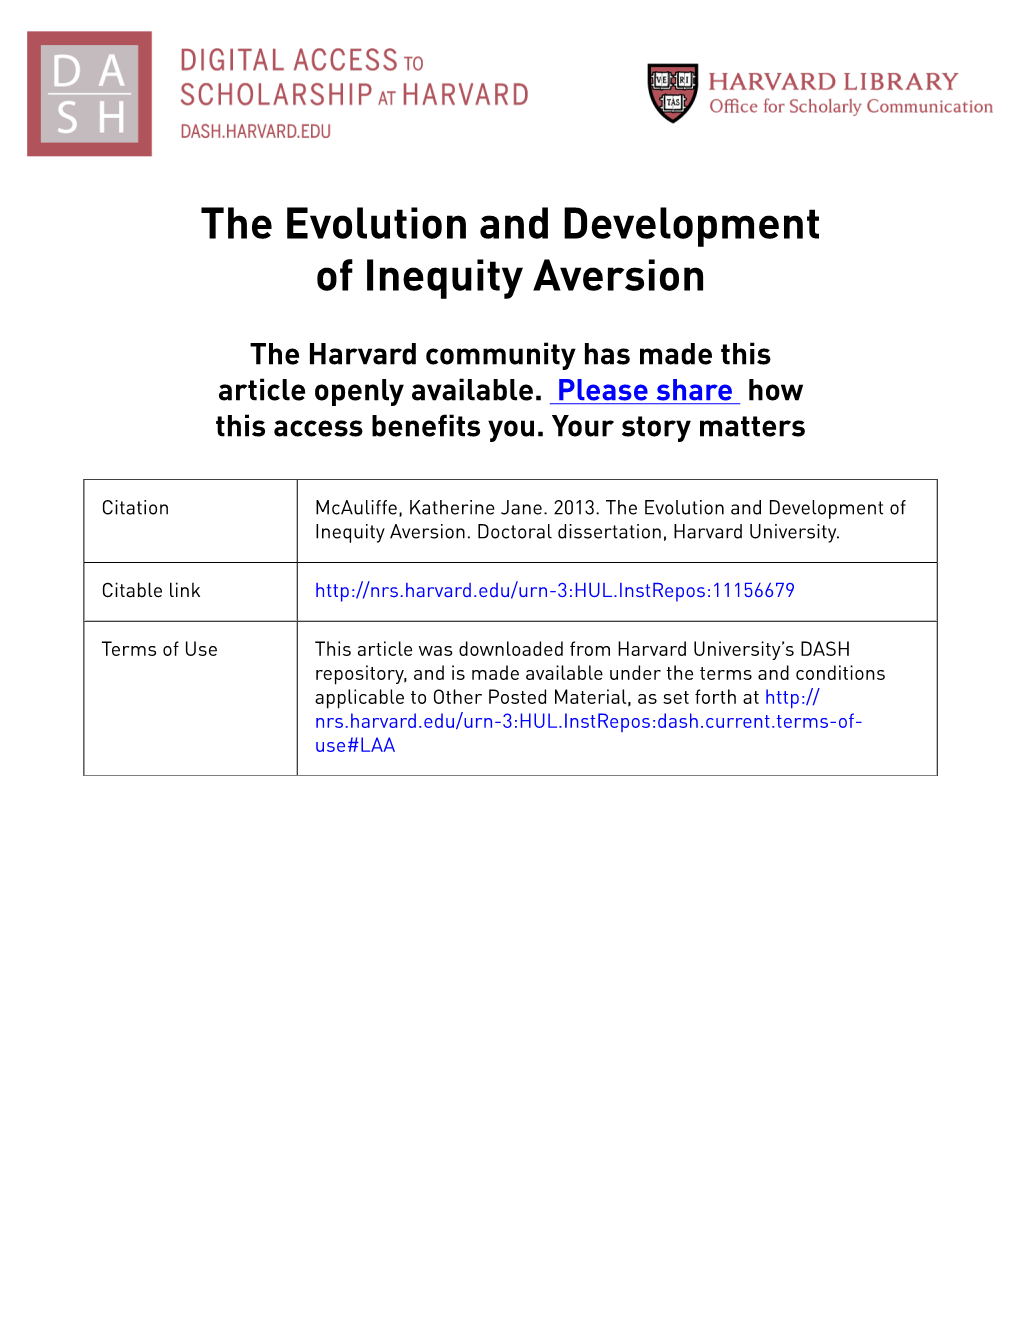 The Evolution and Development of Inequity Aversion